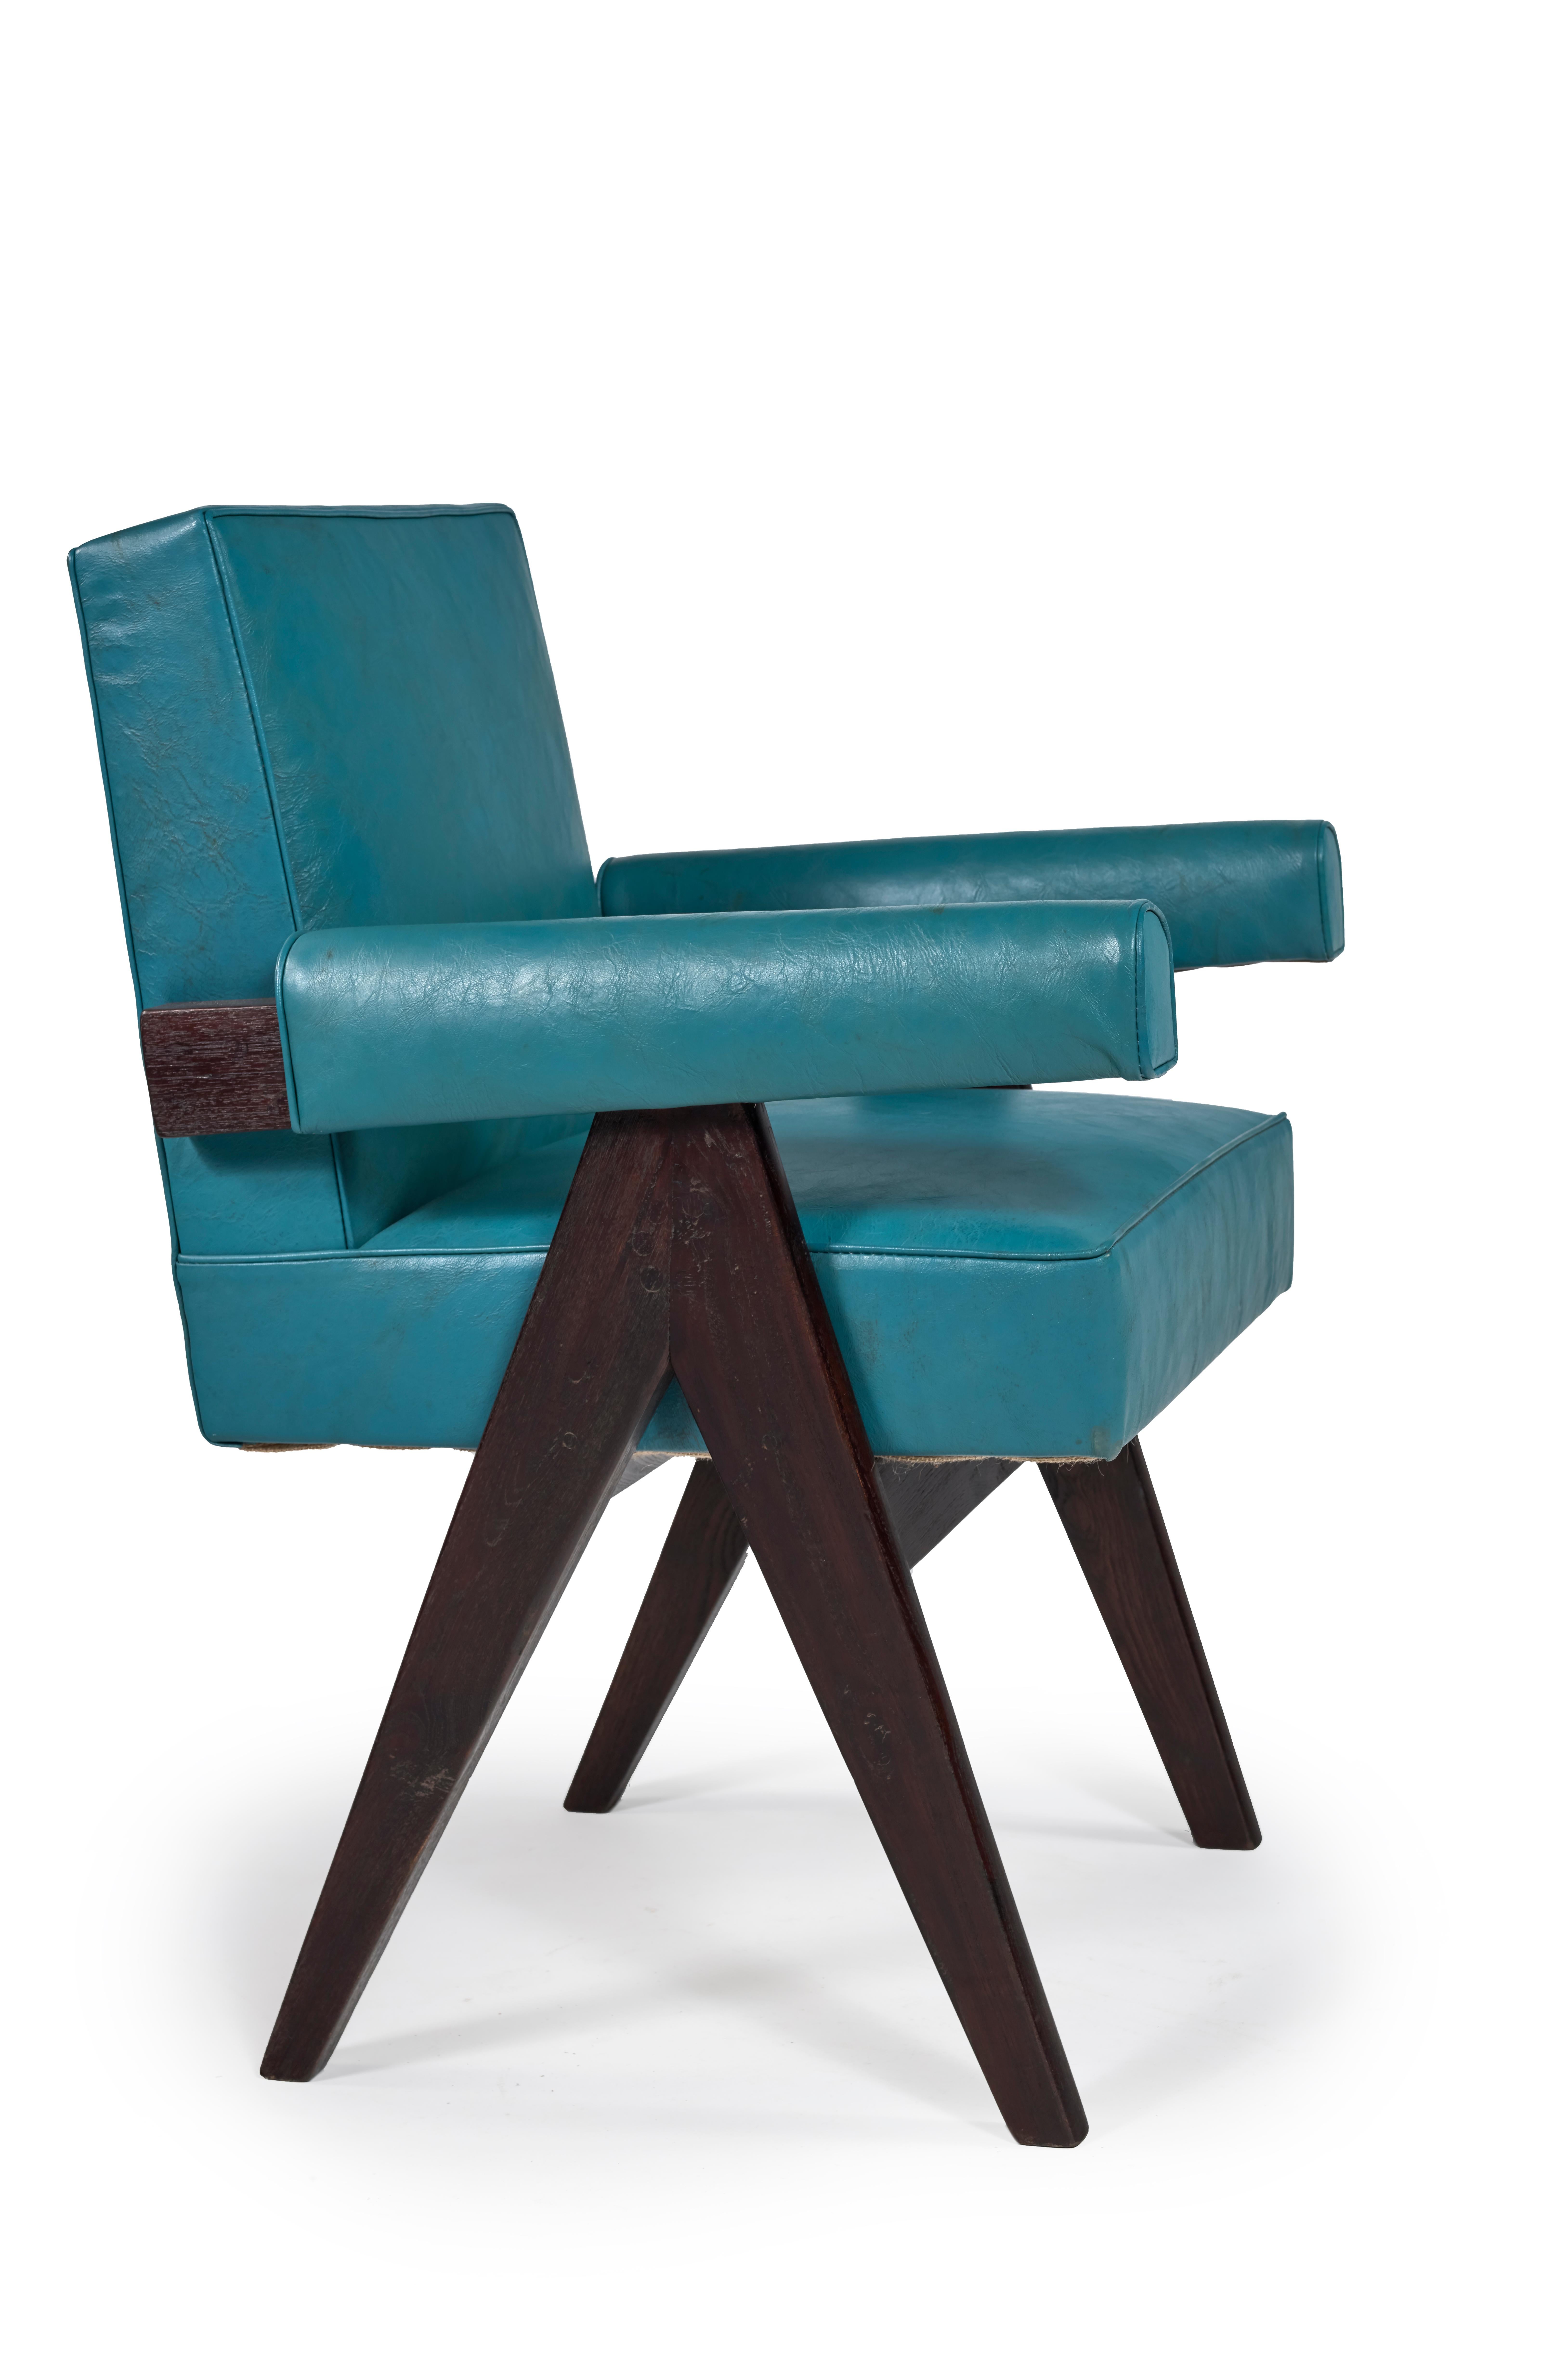 Pierre Jeanneret
PJ-SI-30-C
Committee Armchair, circa 1955.
Solid teak. Leather.
Various administrative buildings. Chandigarh India
Important : vintage collector's item for sale with guaranteed authenticity. 


Bibliography:
Eric